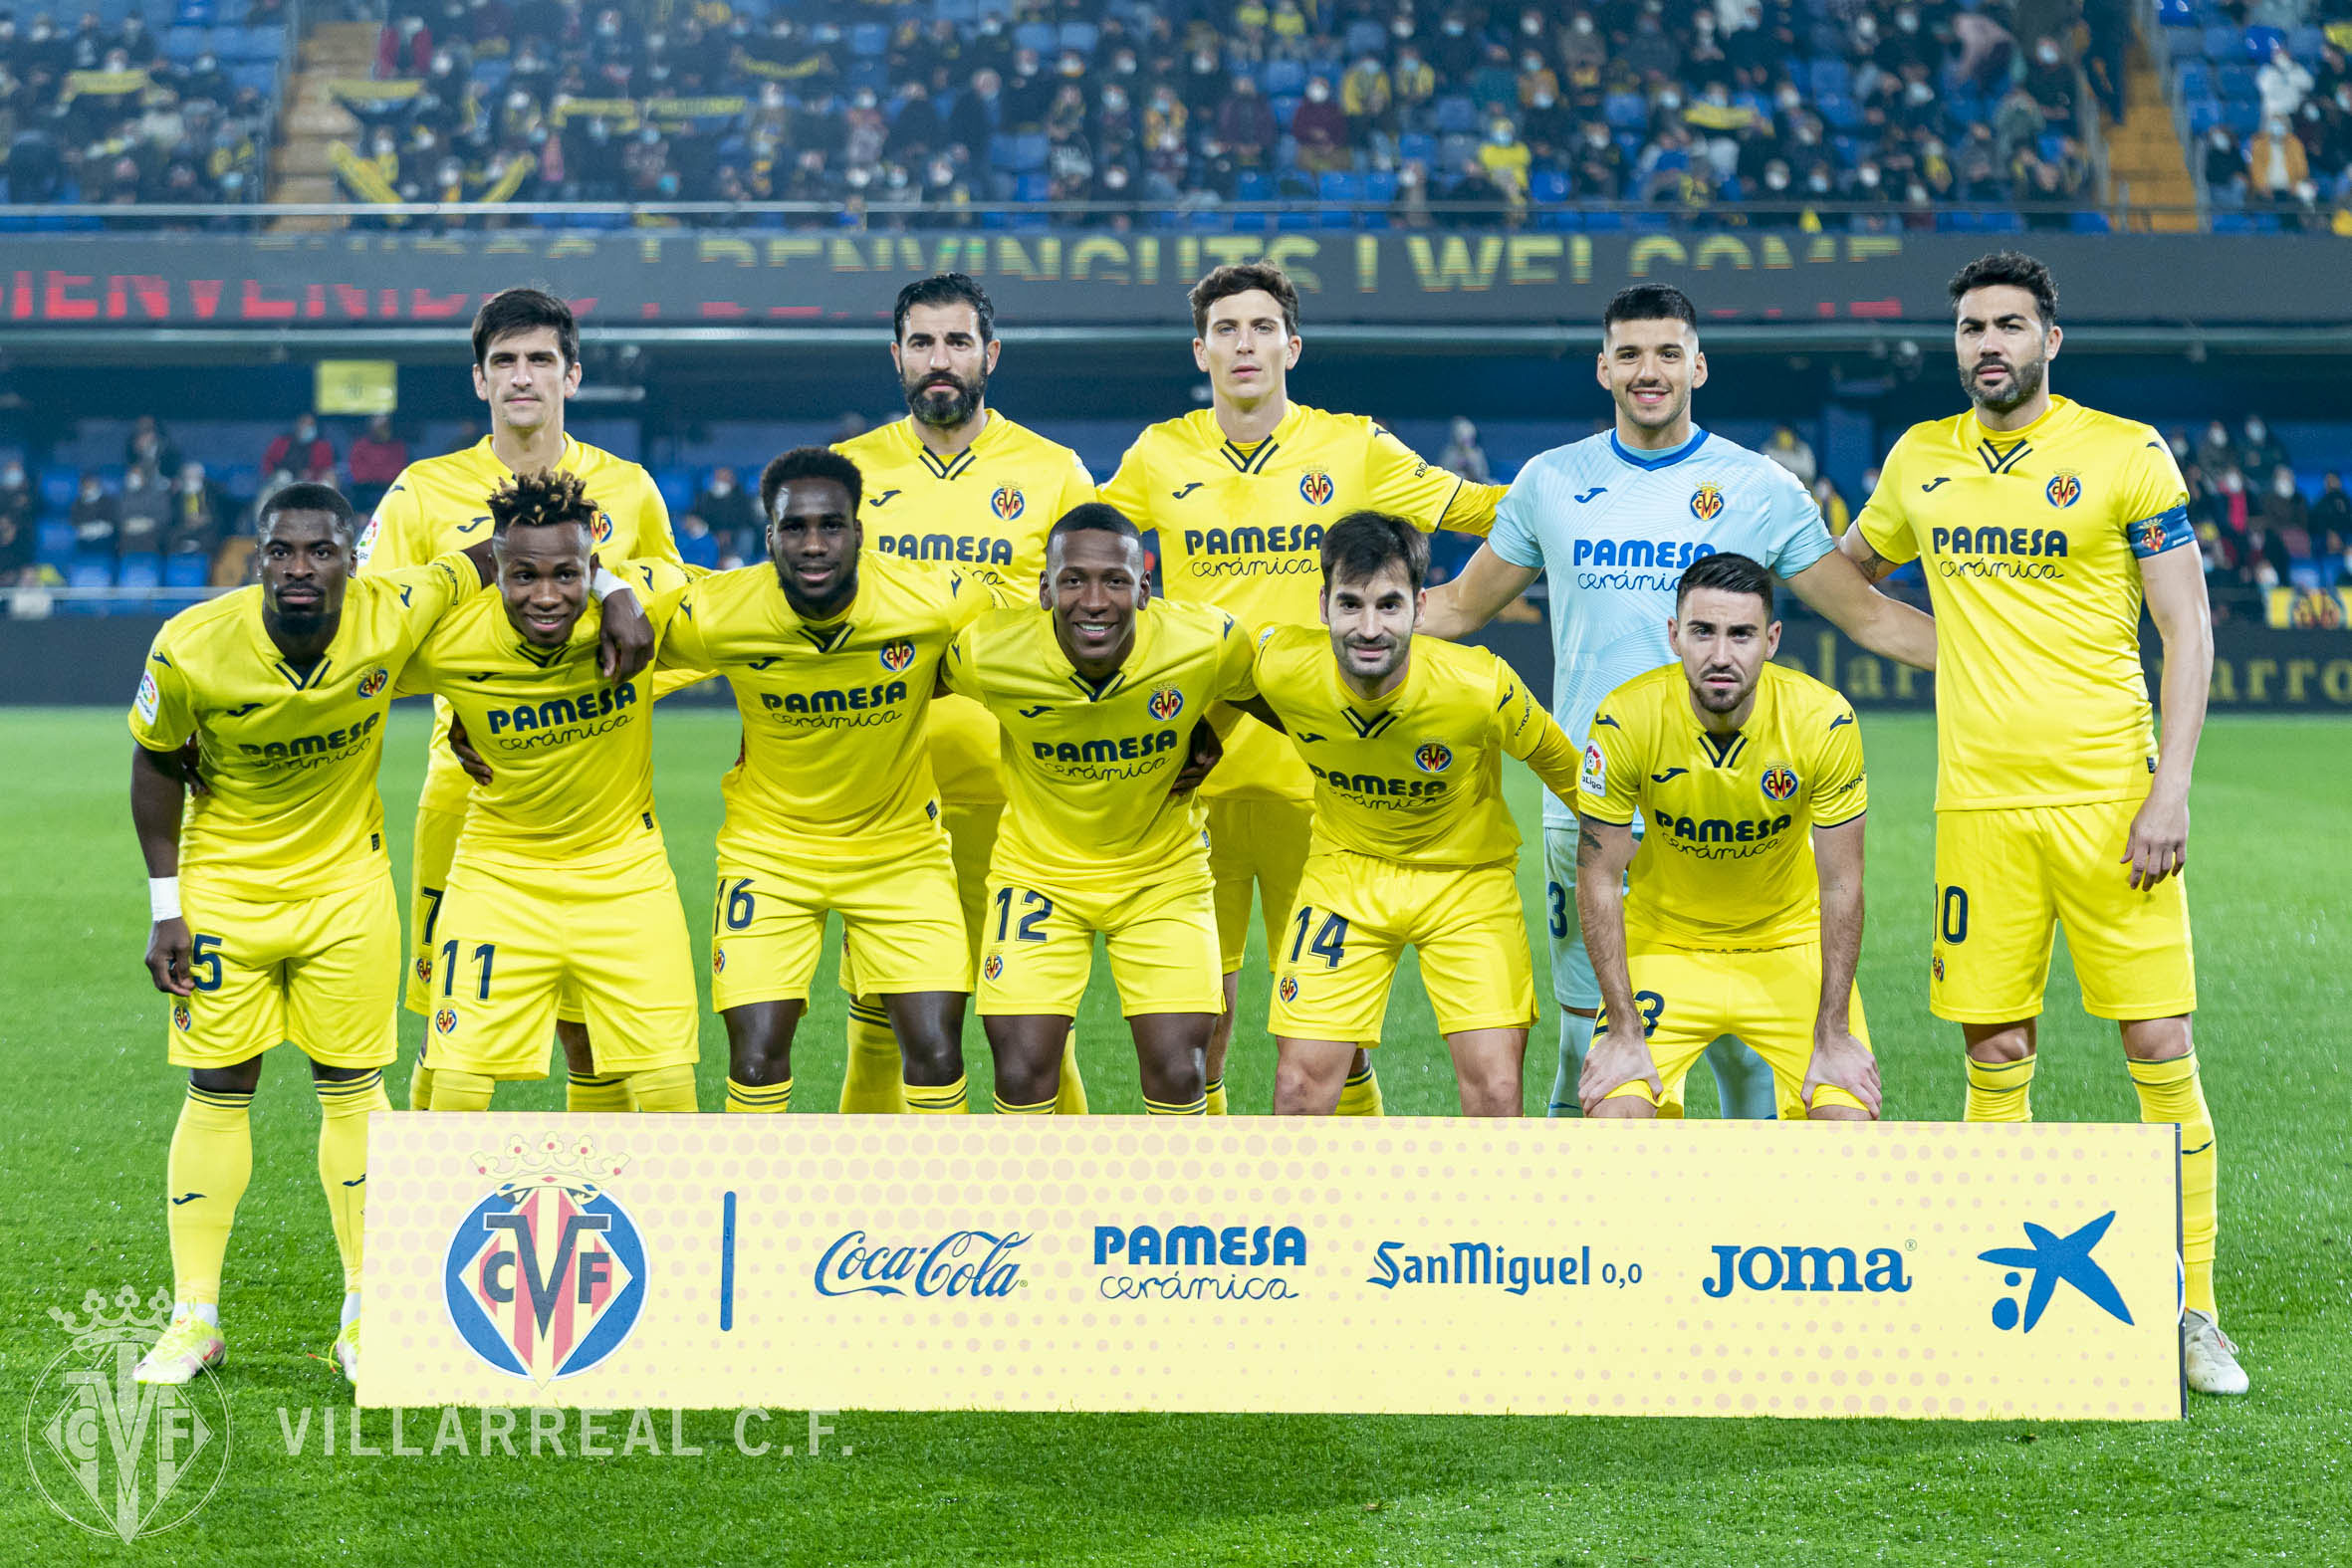 La Liga: Villarreal CF unveil STADIUM transformation project which will be ready in time for the club’s centenary in 2023 - Check out features